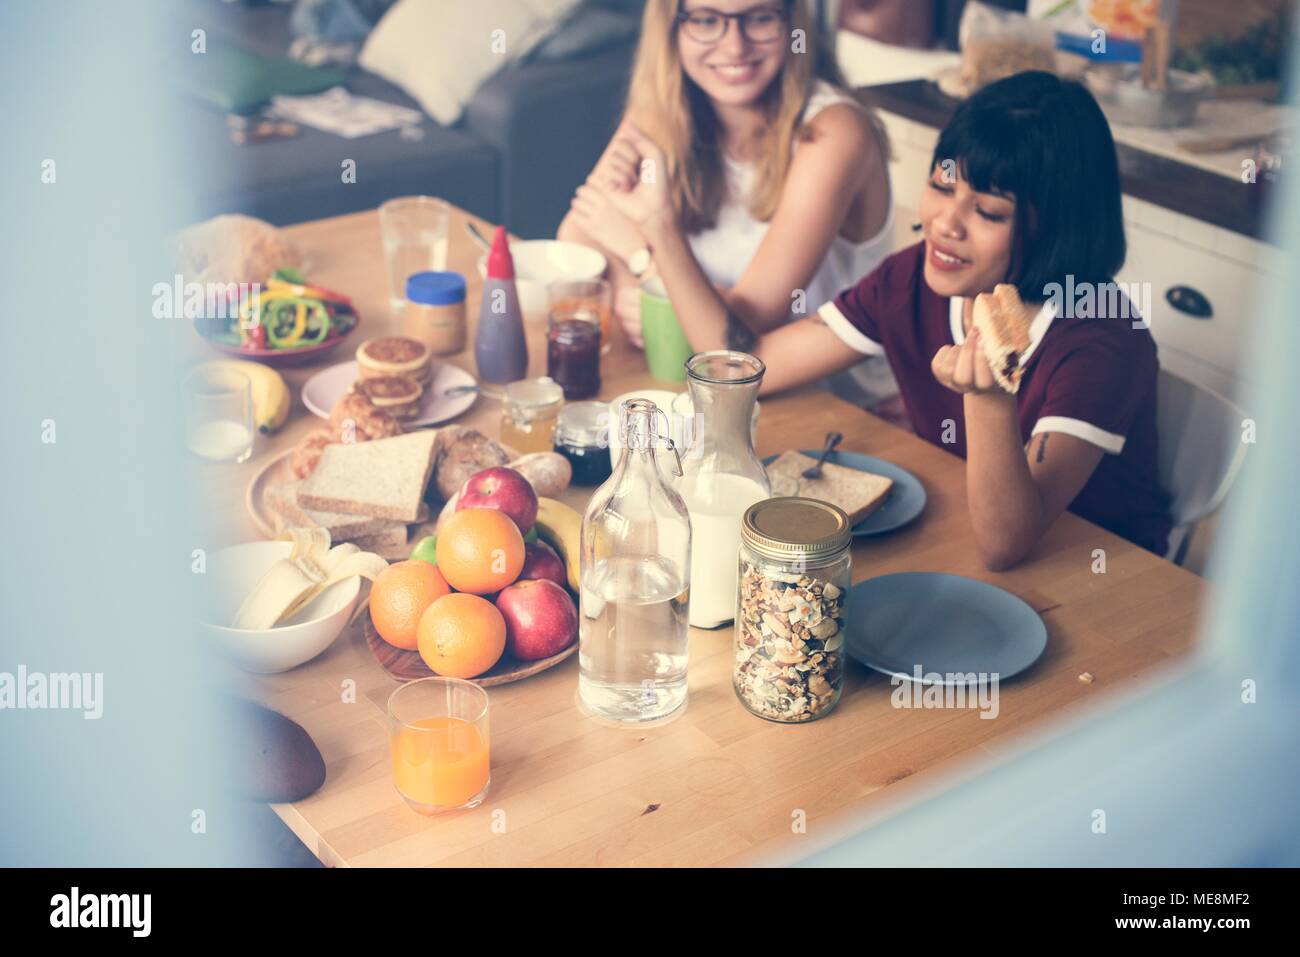 A group of diverse women having breakfast together Stock Photo